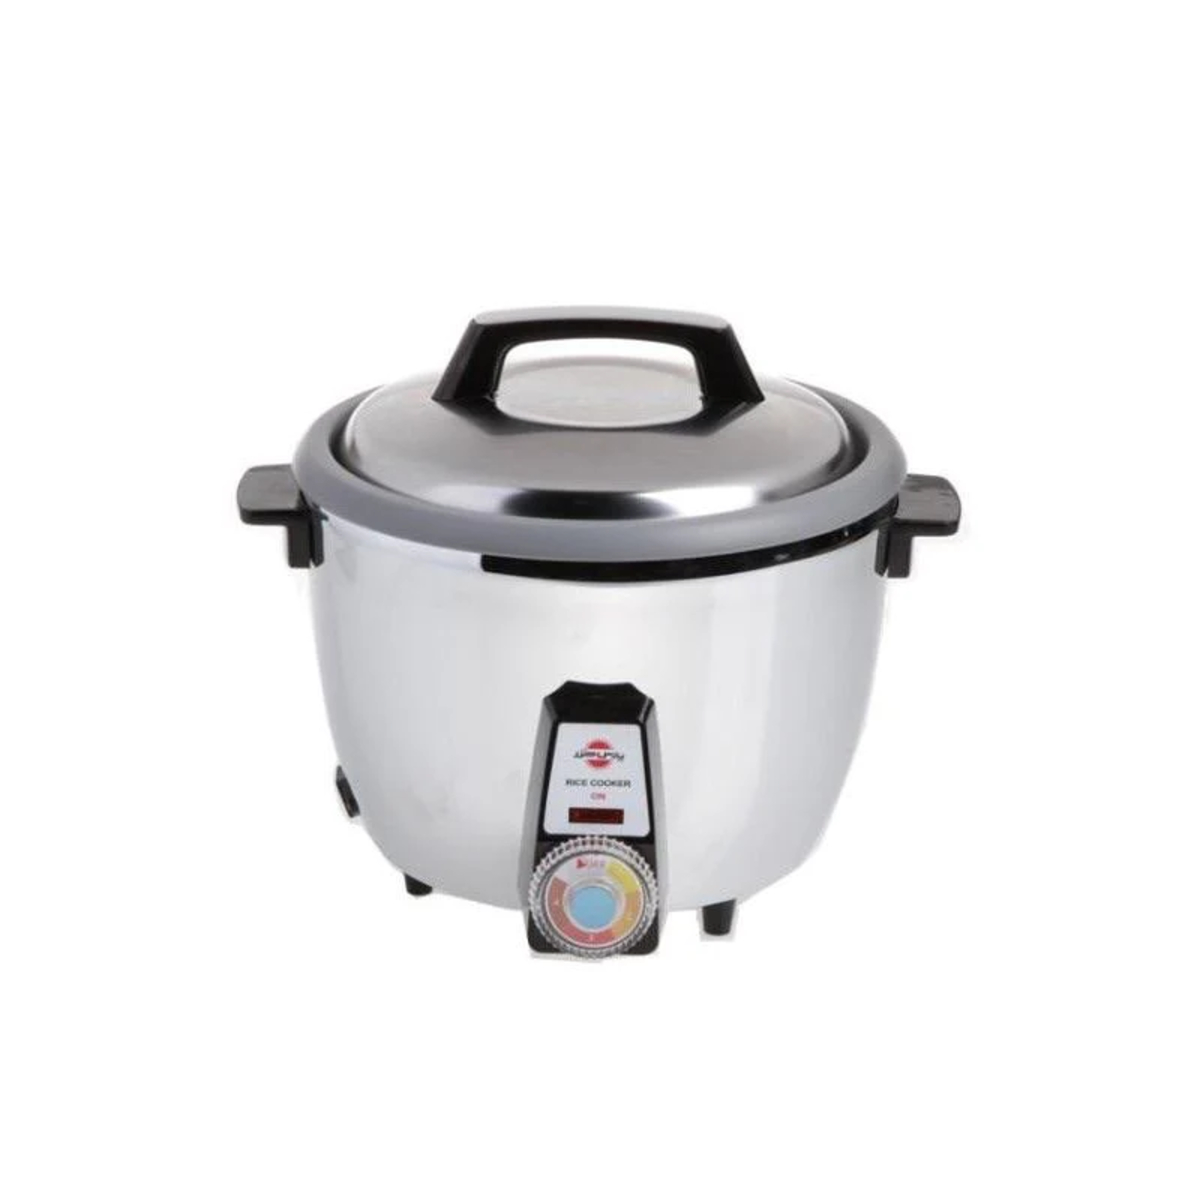 Bear Rice Cooker 3 Cups (Uncooked), Fast Electric Pressure Cooker